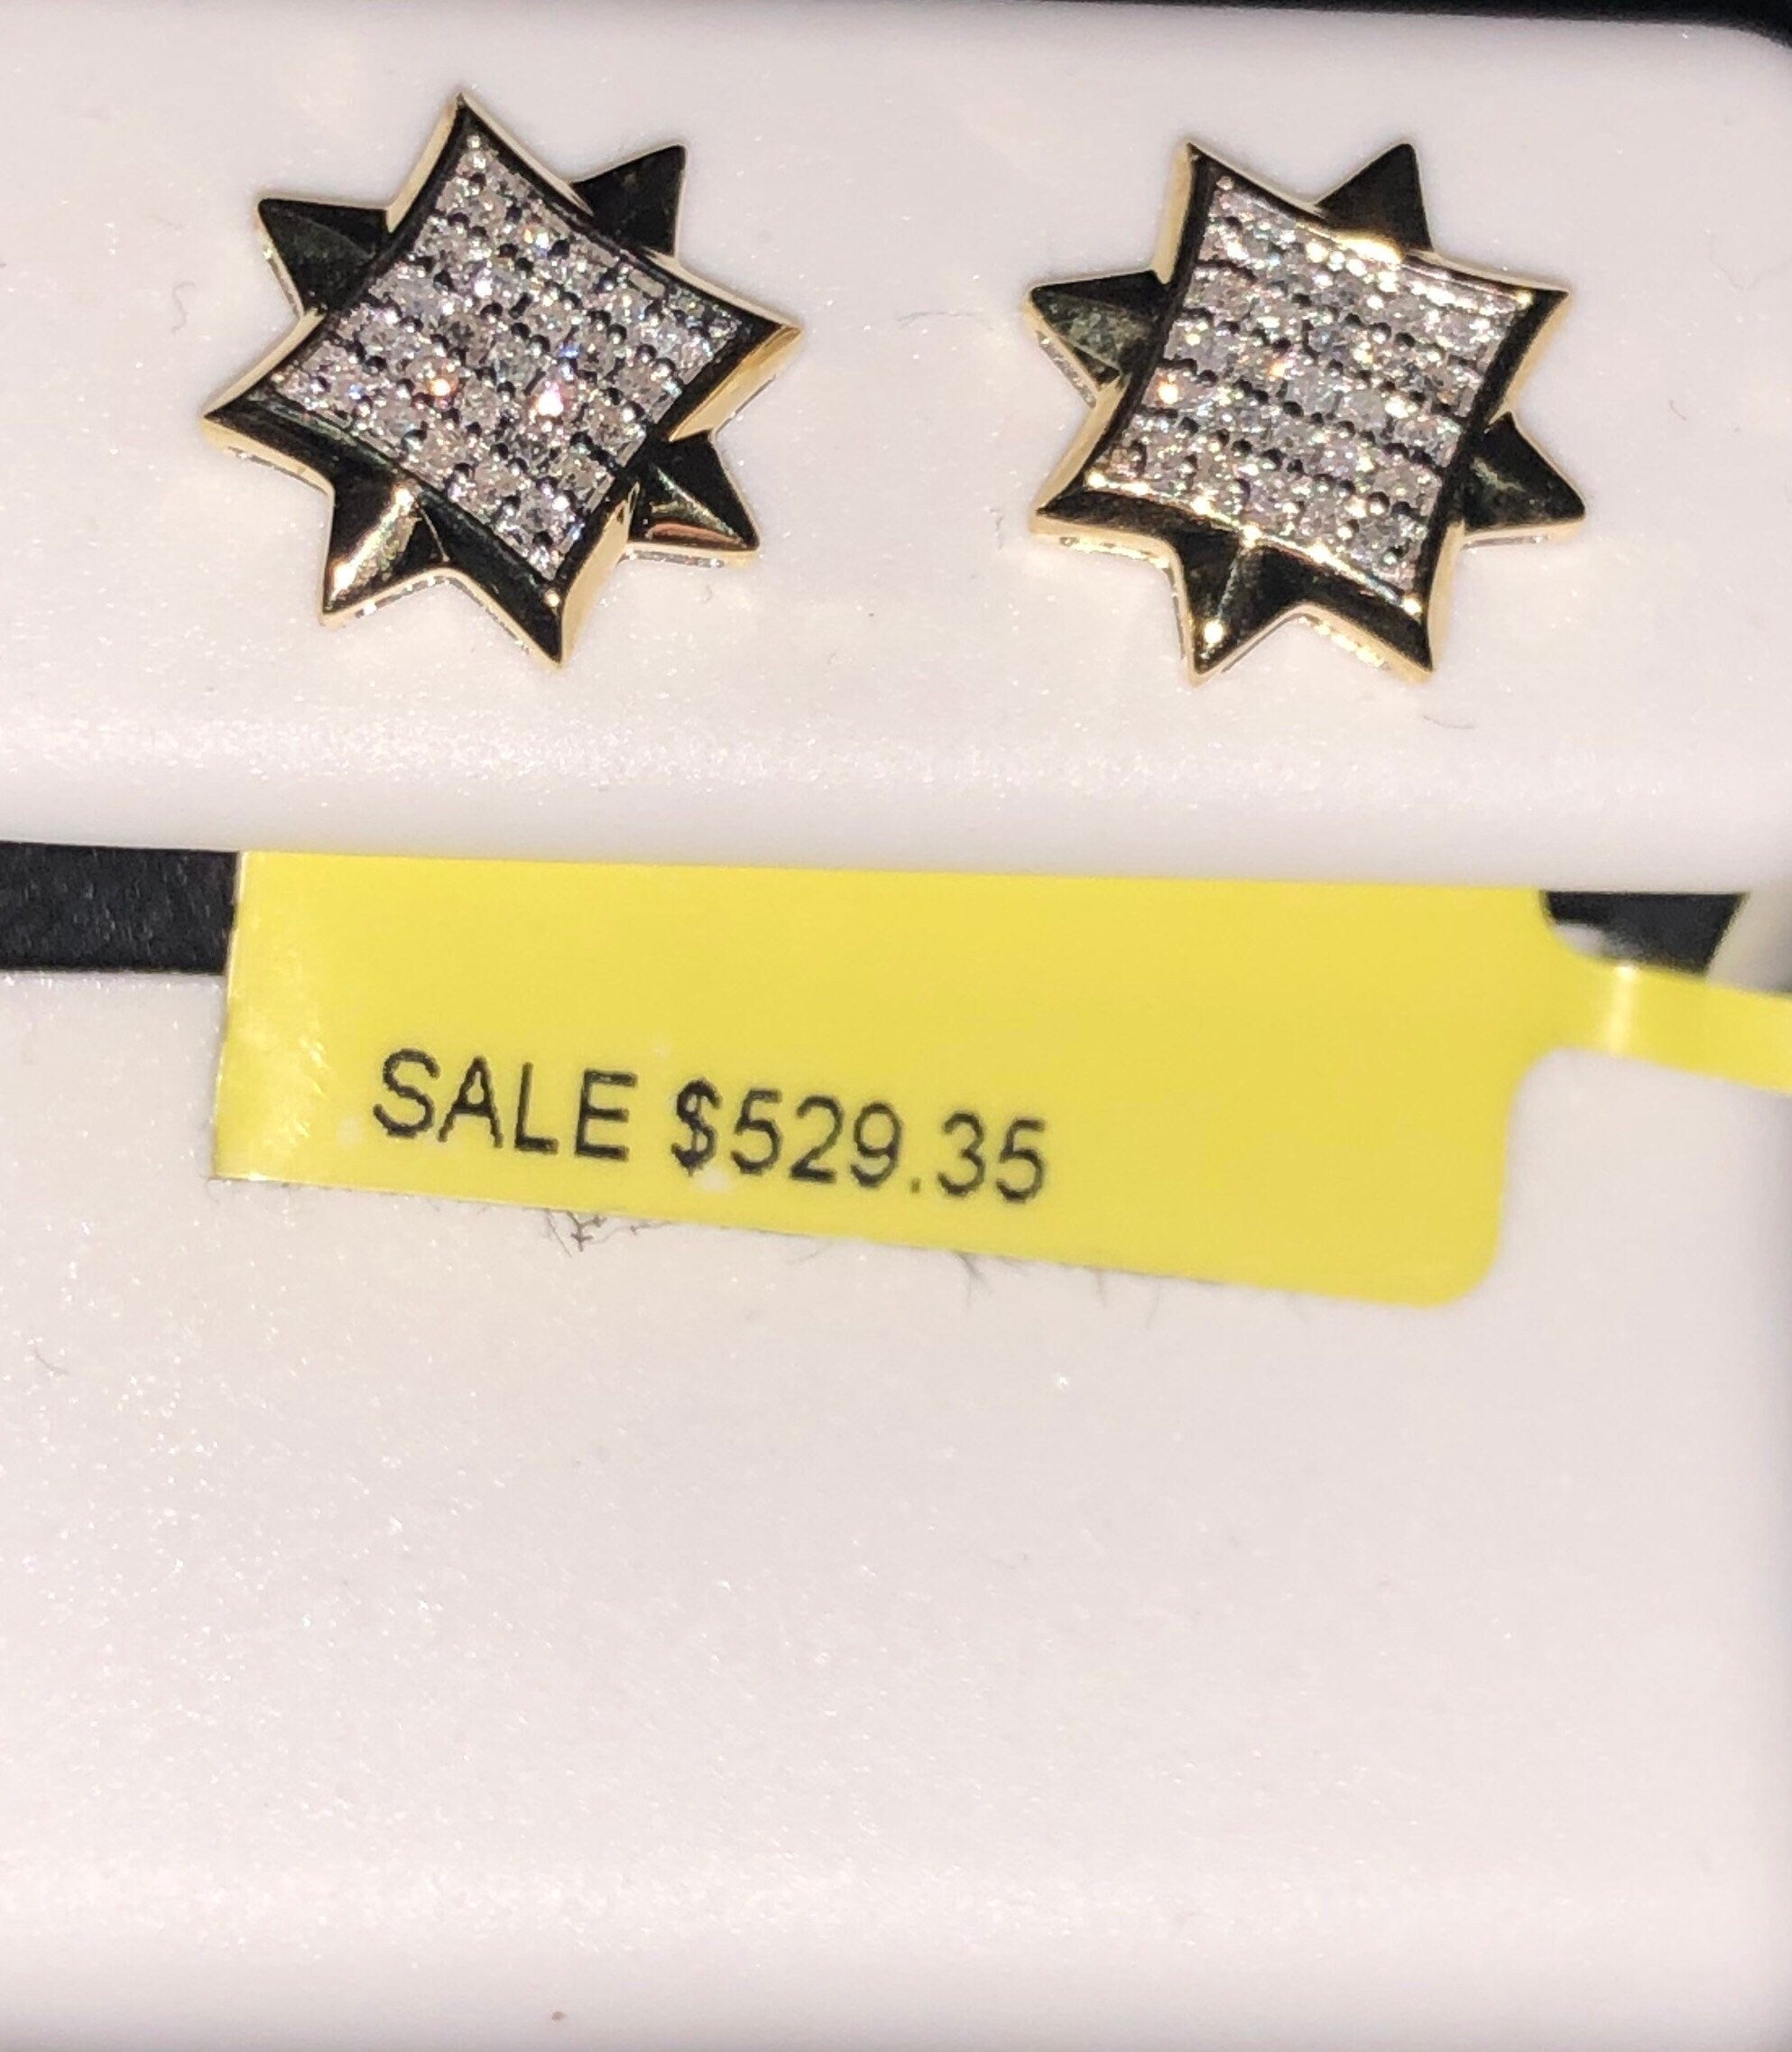 10k solid gold designer real diamond earrings. Not CZ not moissanite not plated authenticity certificate included.